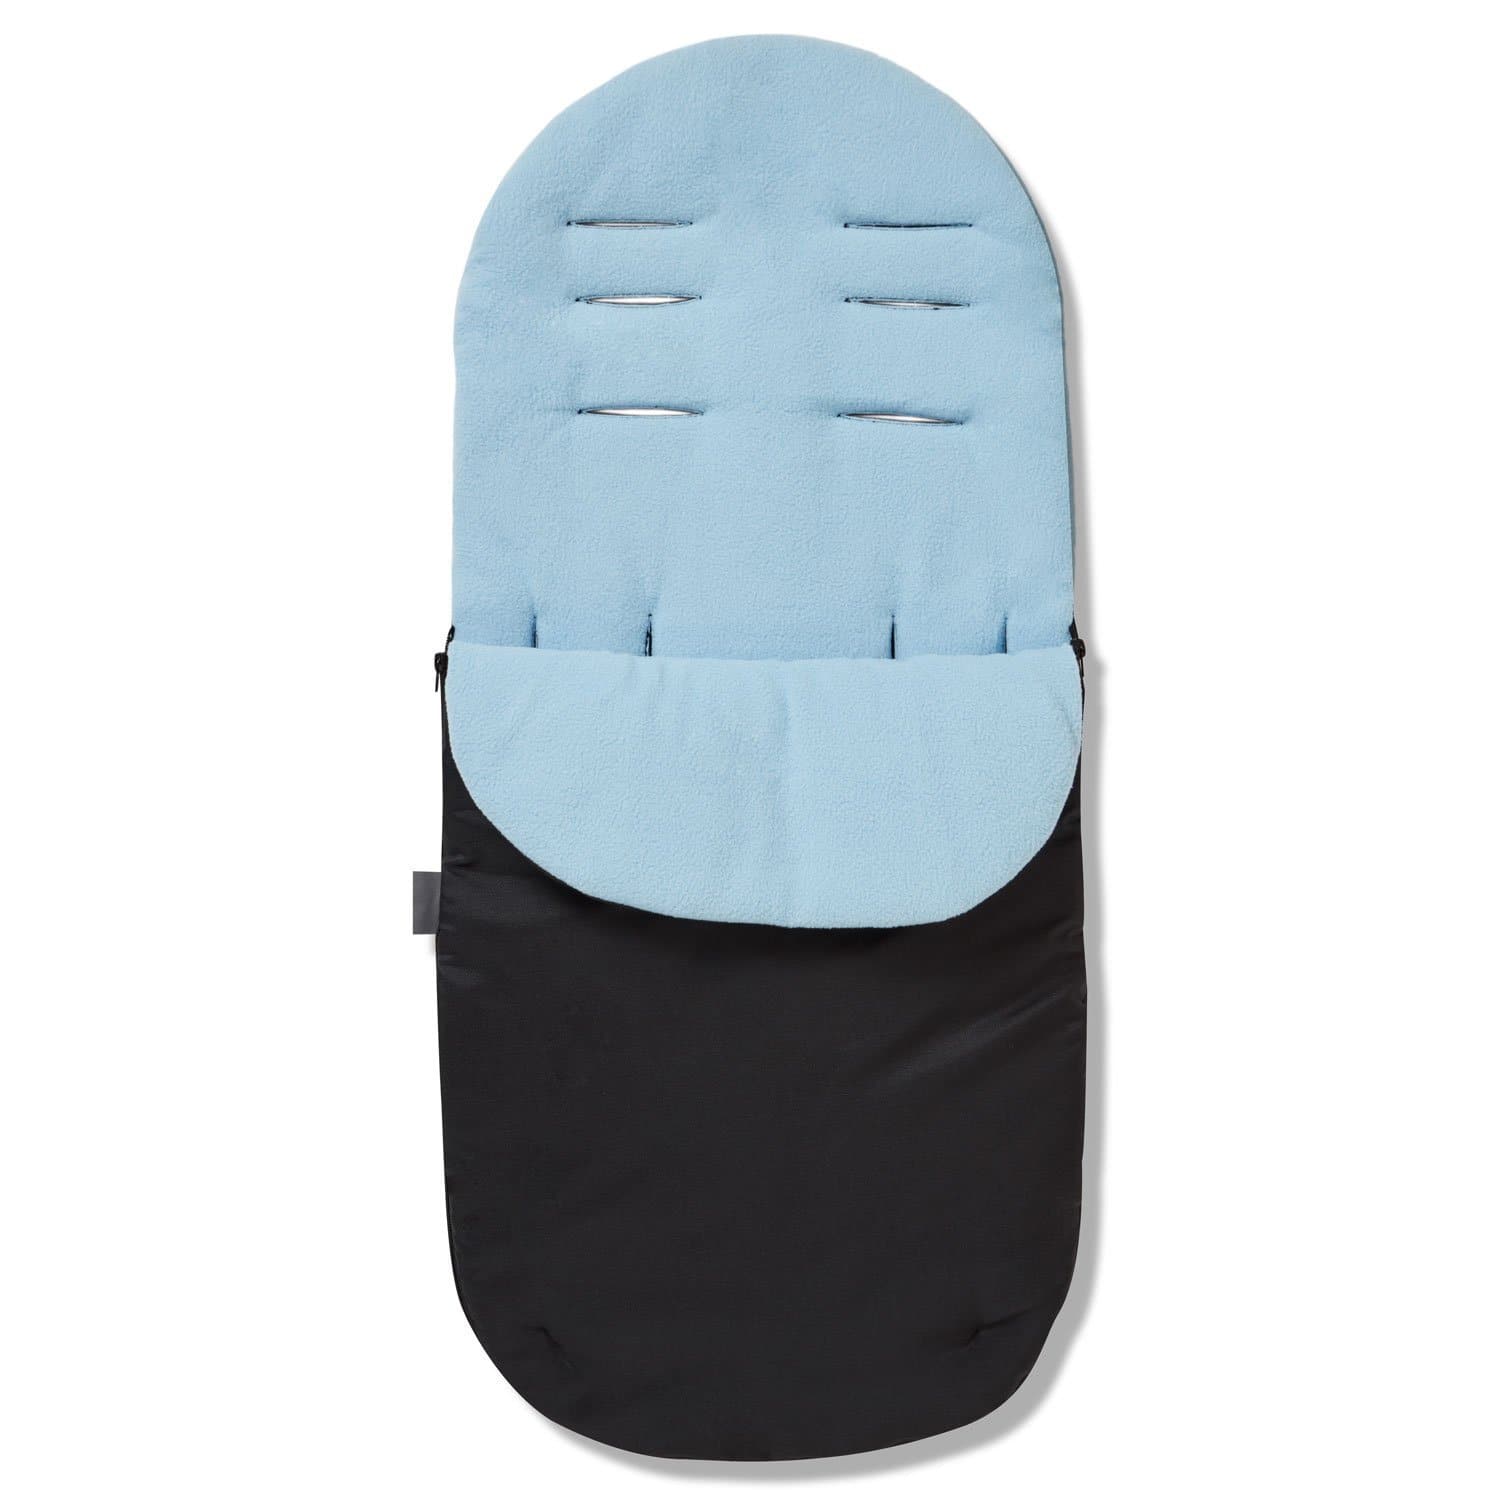 Footmuff / Cosy Toes Compatible with Tippitoes - Light Blue / Fits All Models | For Your Little One